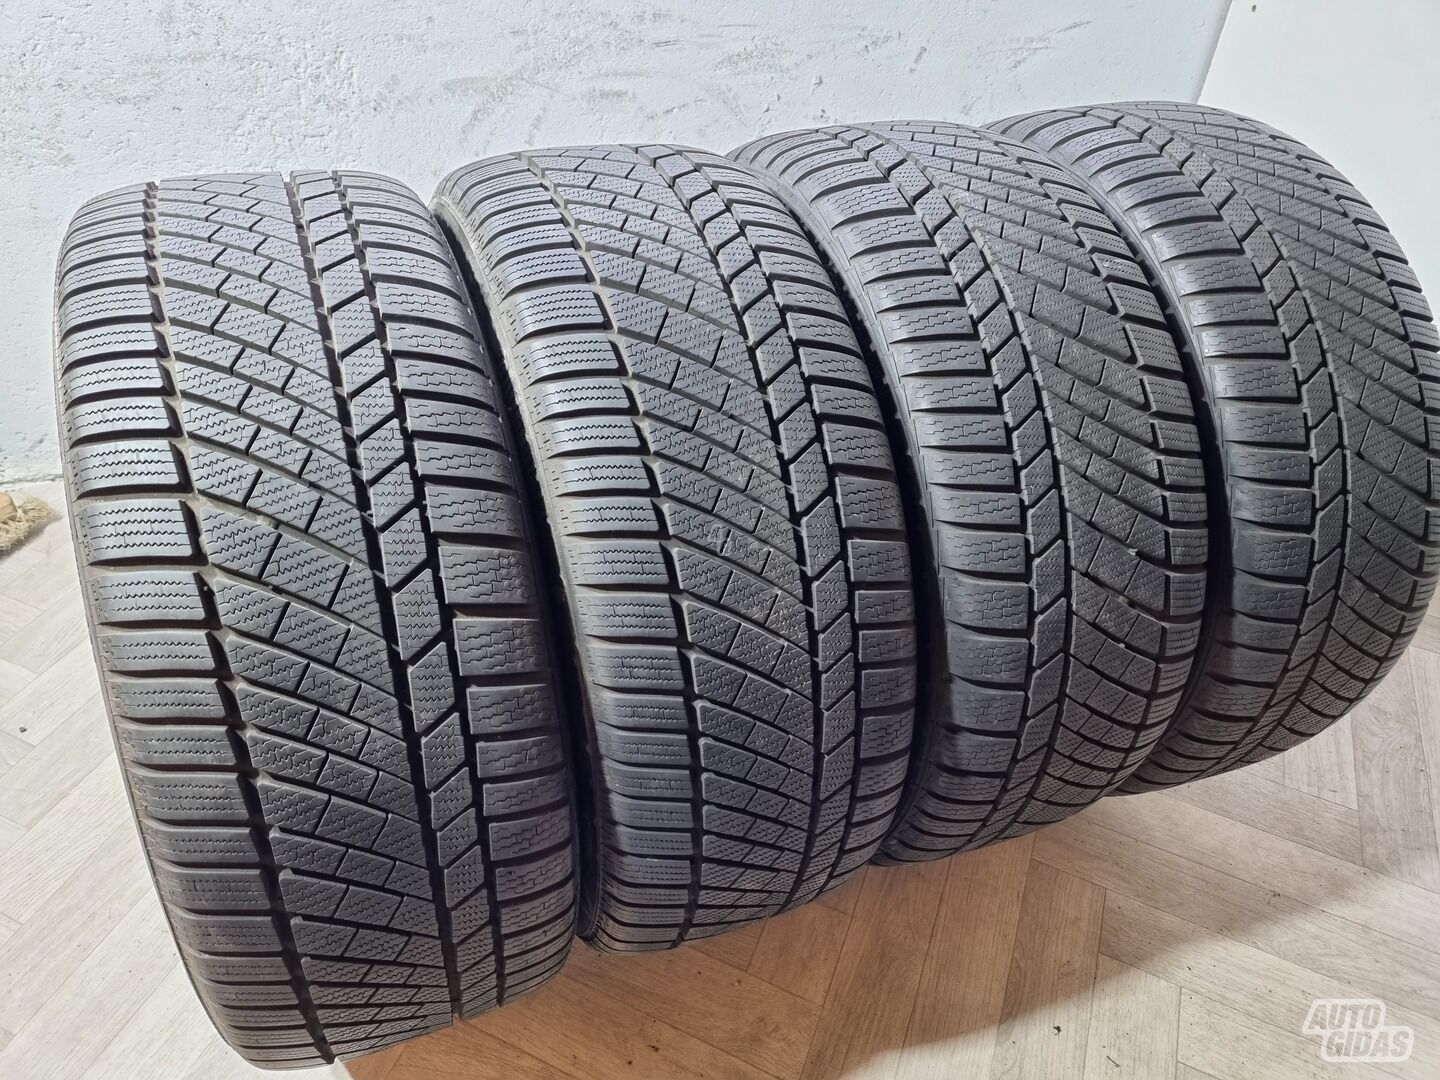 Continental 7-8mm R18 winter tyres passanger car